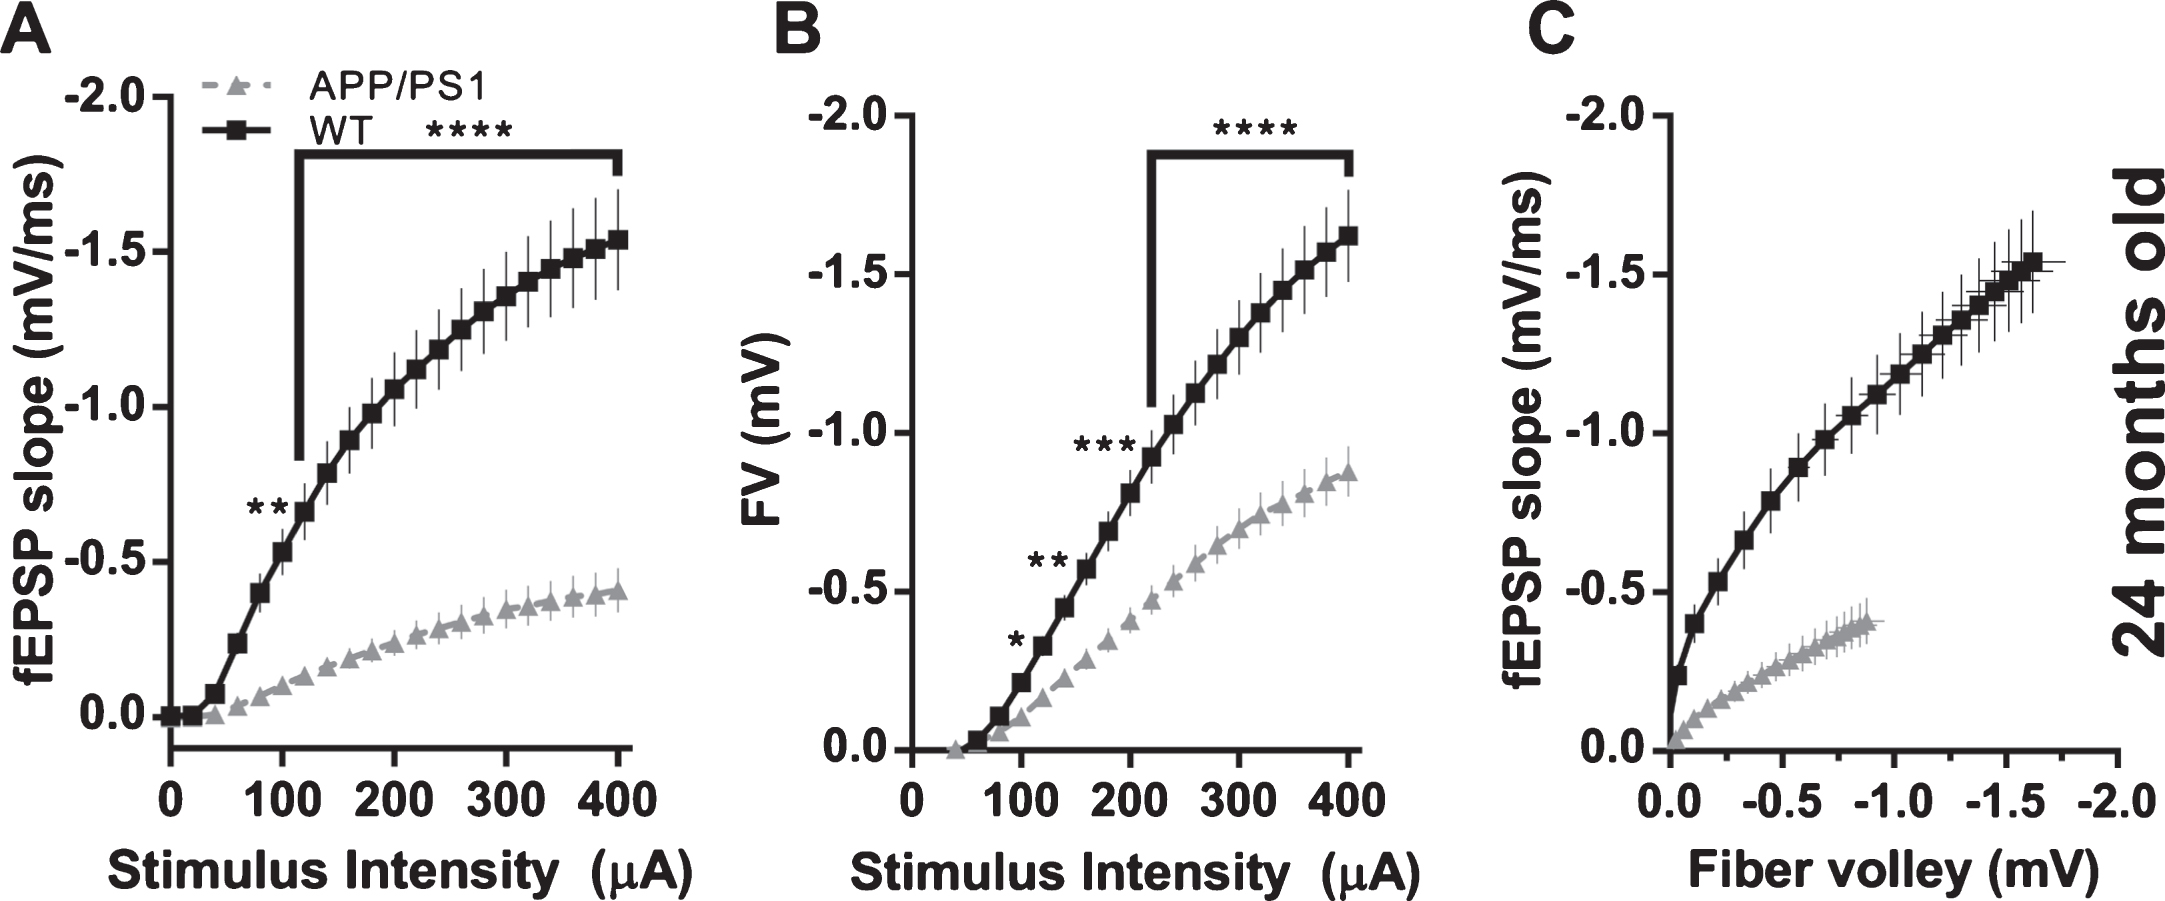 Effect of APP/PS1 mutations on basal synaptic transmission in 24-month-old mice. A) fEPSP slopes versus stimulus intensity (WT n = 33 slices from 3 animals; APP/PS1 n = 41 slices from 4 animals; 2-way ANOVA; genotype: F(1, 1512) = 778.5, p < 0.0001; stimulus amplitude: F(20, 1512) = 33.96, p < 0.0001; interaction: F(20, 1512) = 11.26, p < 0.0001; asterisks indicate results of Bonferroni’s multiple comparisons test). B) Fiber volley amplitudes versus stimulus intensity (WT n = 33 slices from 3 animals; APP/PS1 n = 41 slices from 4 animals; 2-way ANOVA; genotype: F(1, 1512) = 319.4, p < 0.0001; stimulus amplitude: F(20, 1512) = 93.74, p < 0.0001; interaction: F(20, 1512) = 8.608, p < 0.0001; asterisks indicate results of Bonferroni’s multiple comparisons test). C) fEPSP slopes versus fiber volley amplitudes.